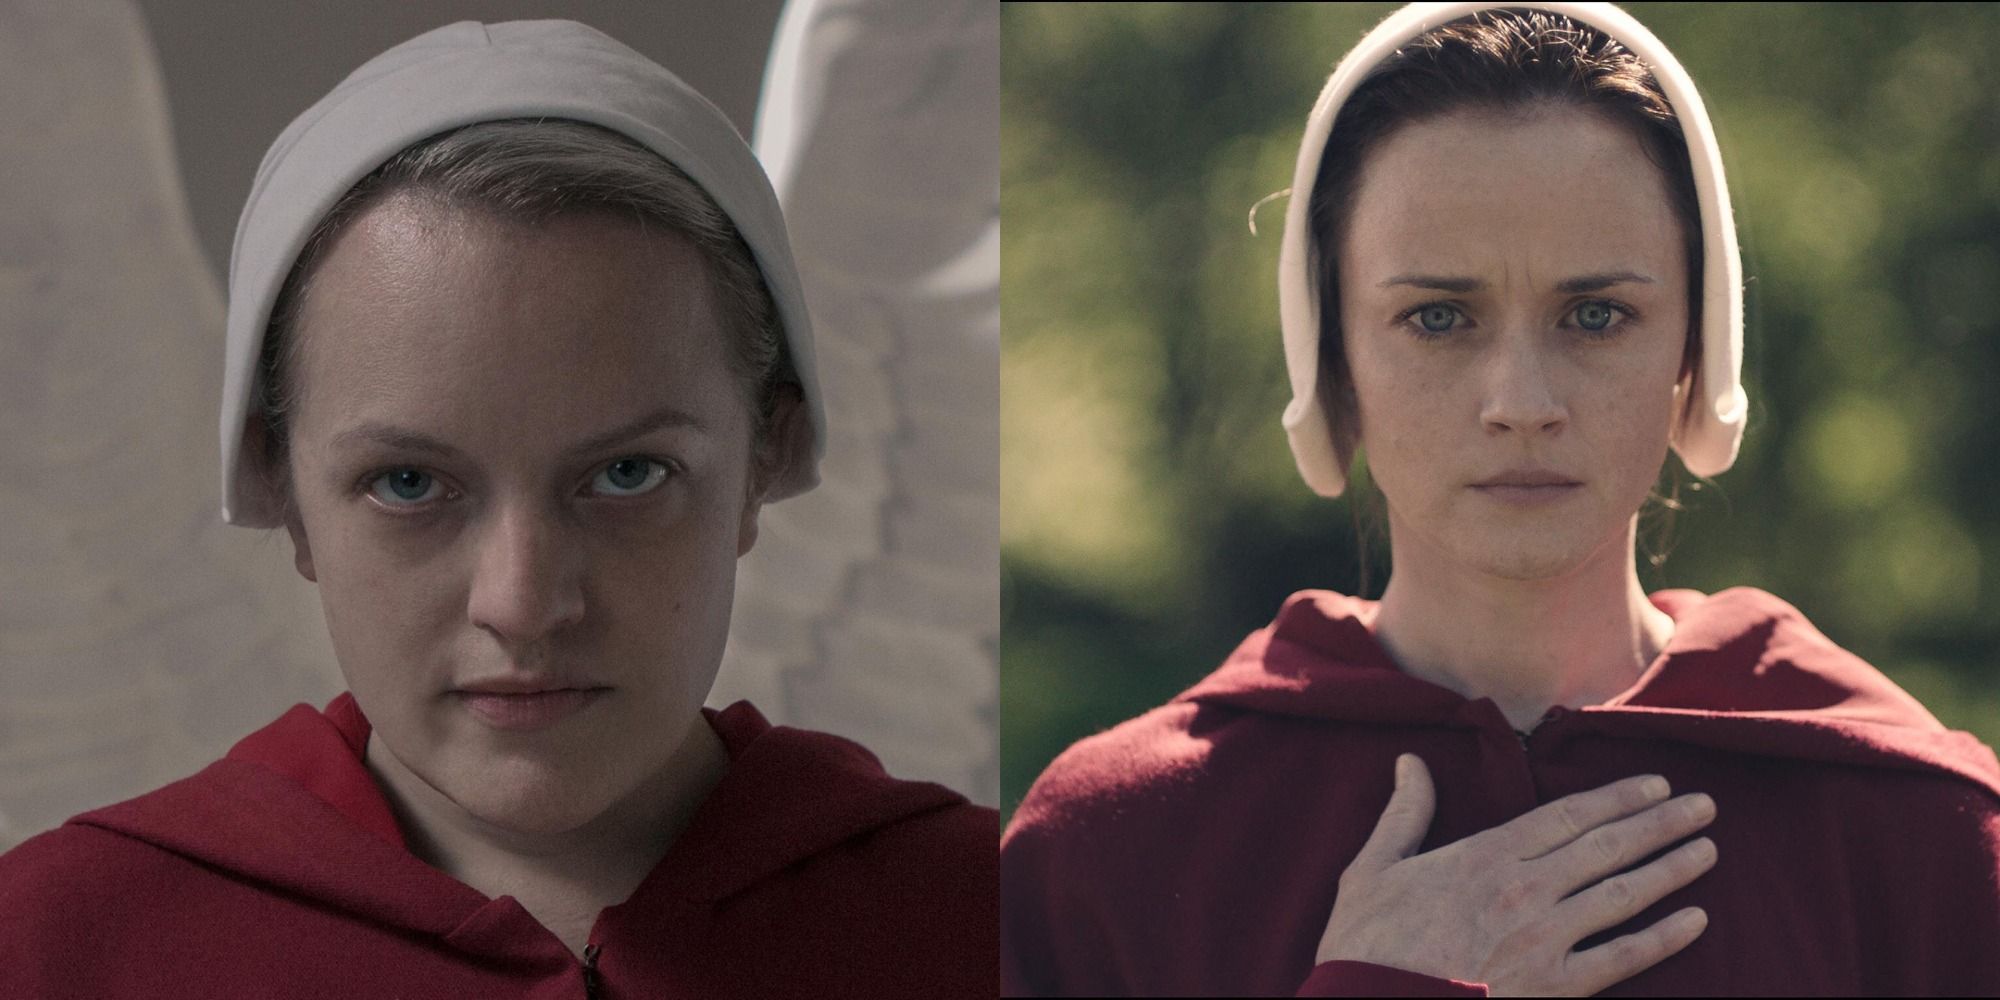 The Handmaids Tale June and Emily